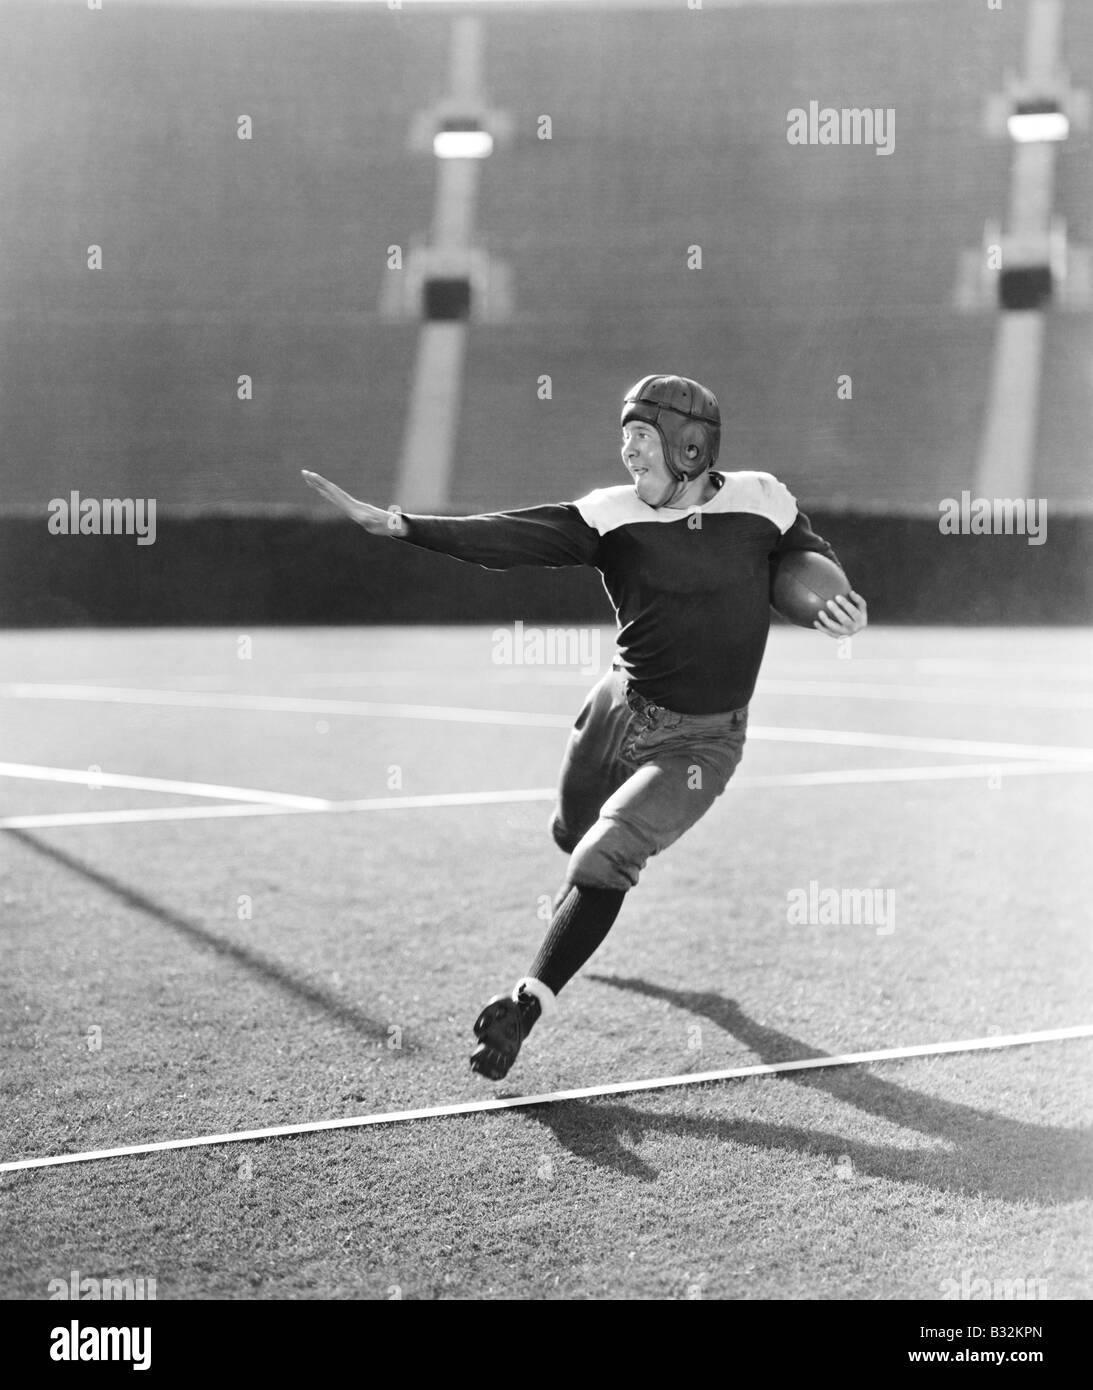 Running running with the ball Black and White Stock Photos & Images - Alamy